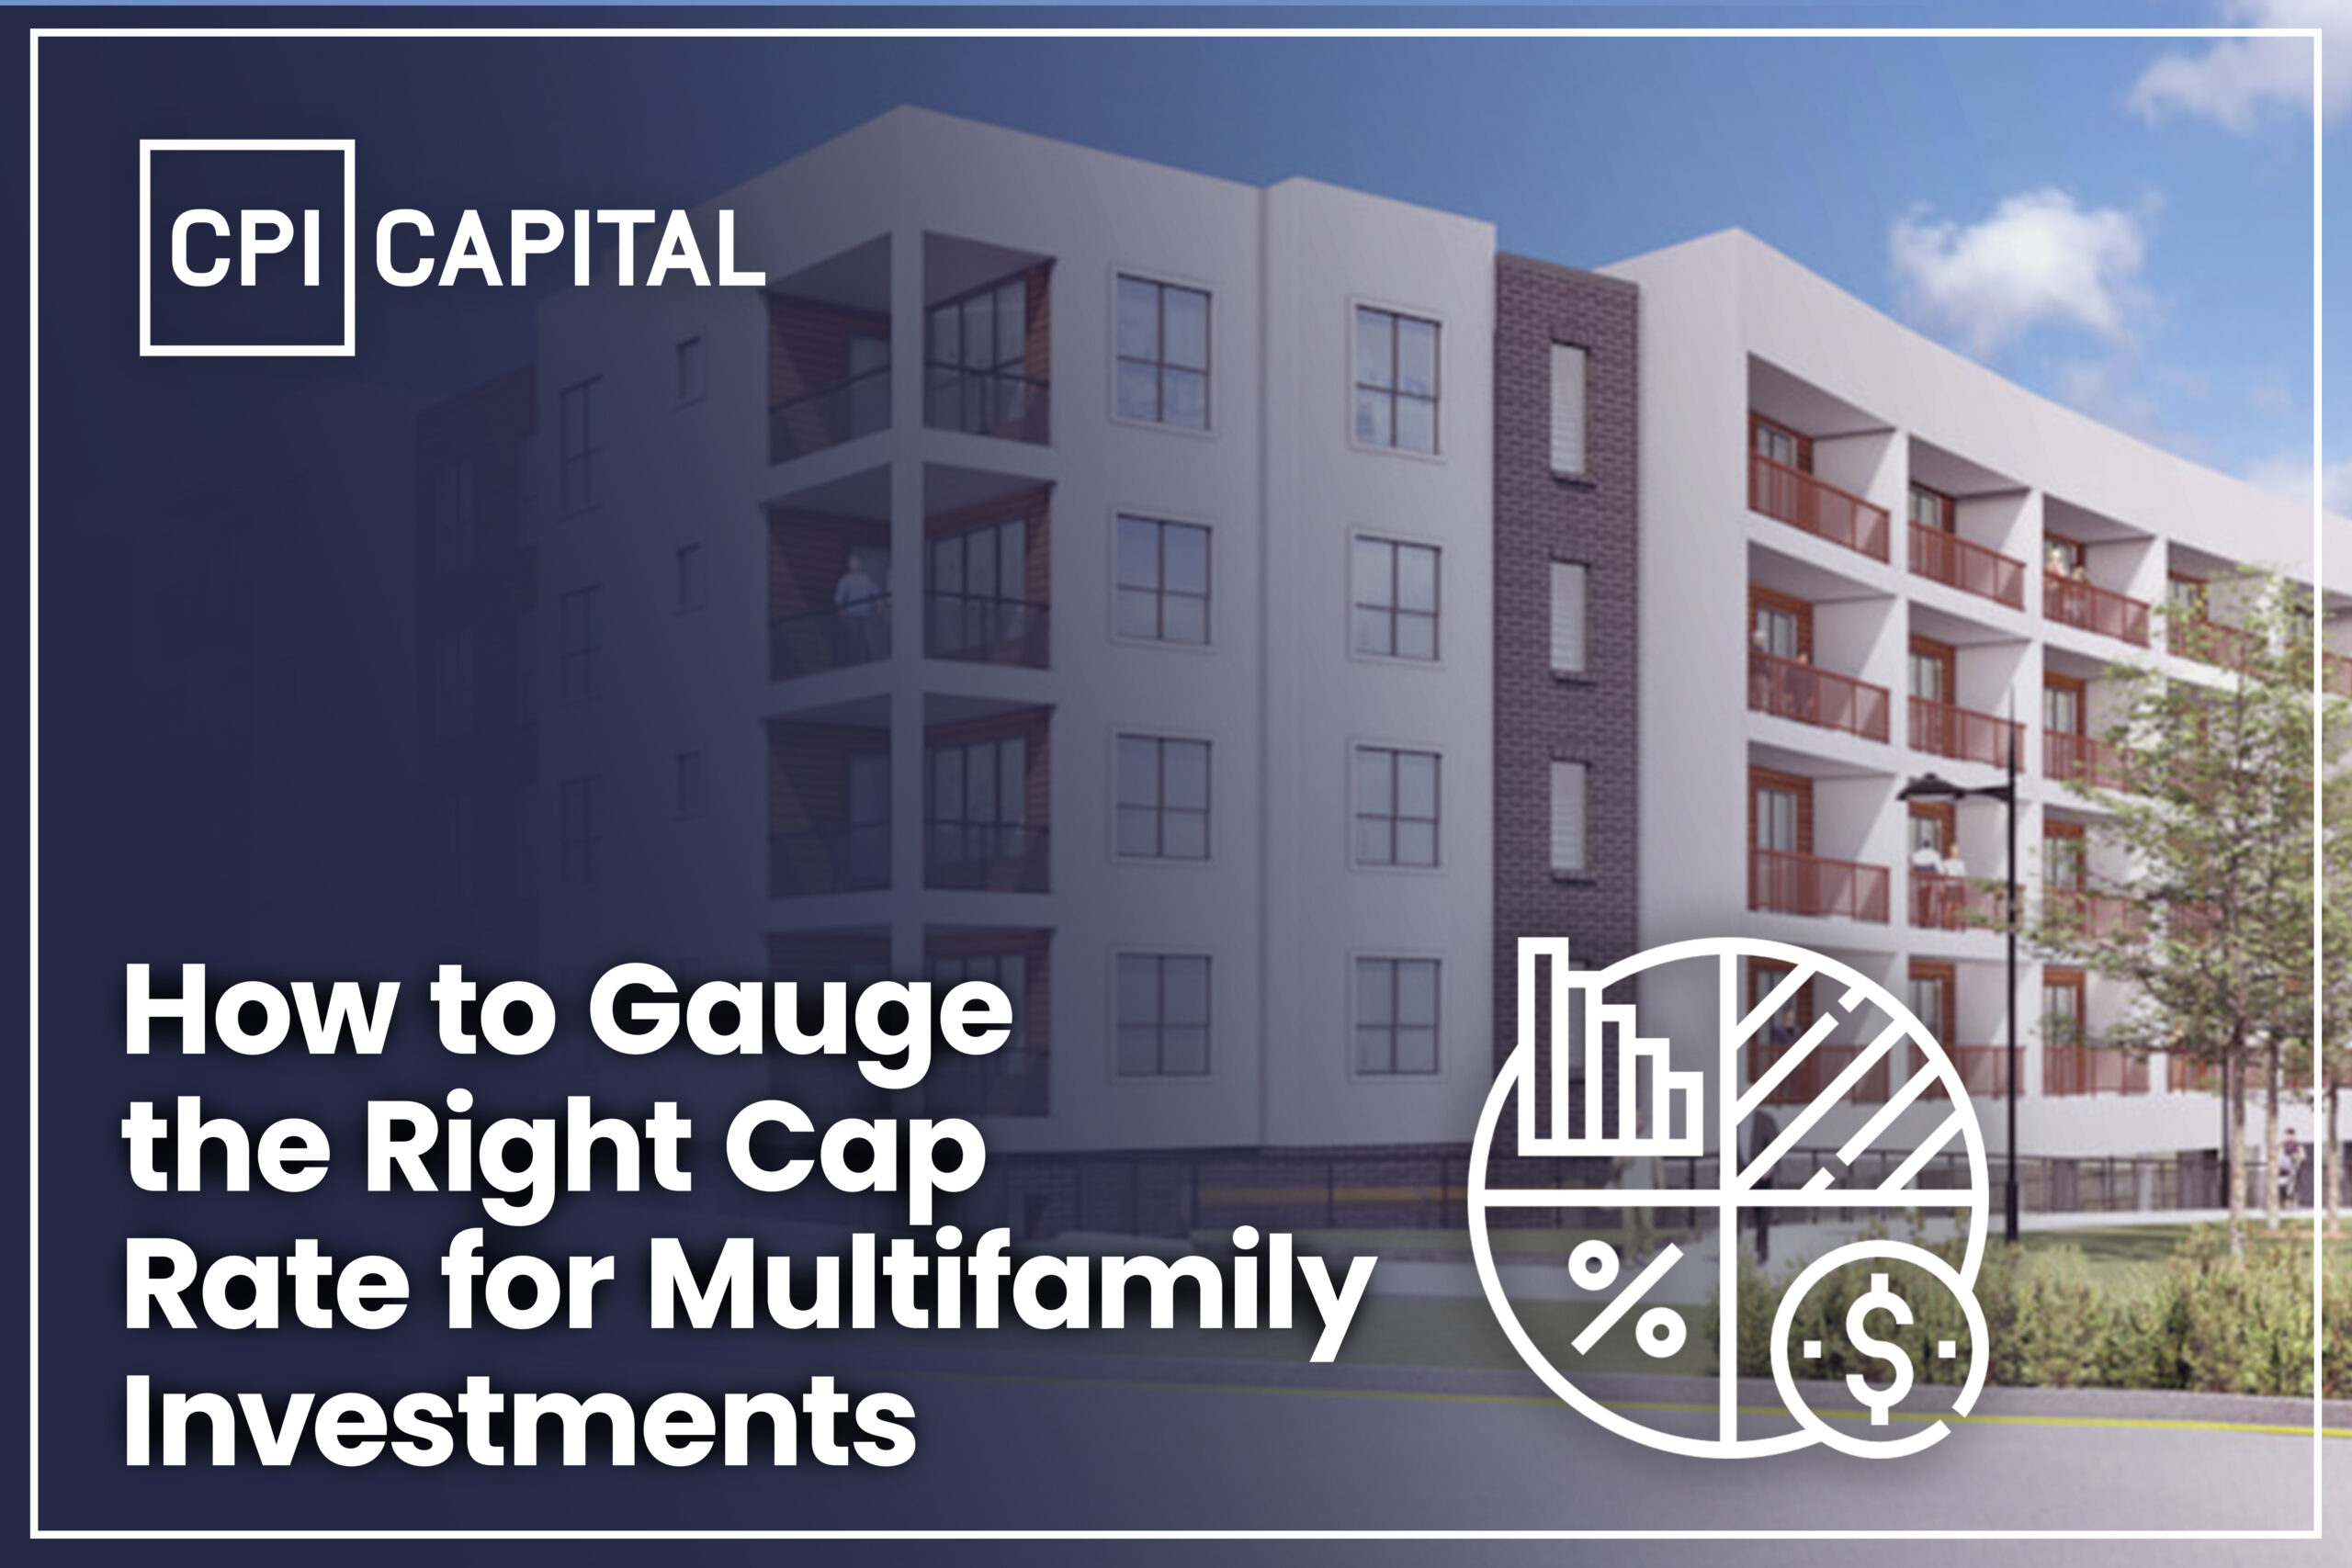 How to Gauge the Right Cap Rate for Multifamily Investments